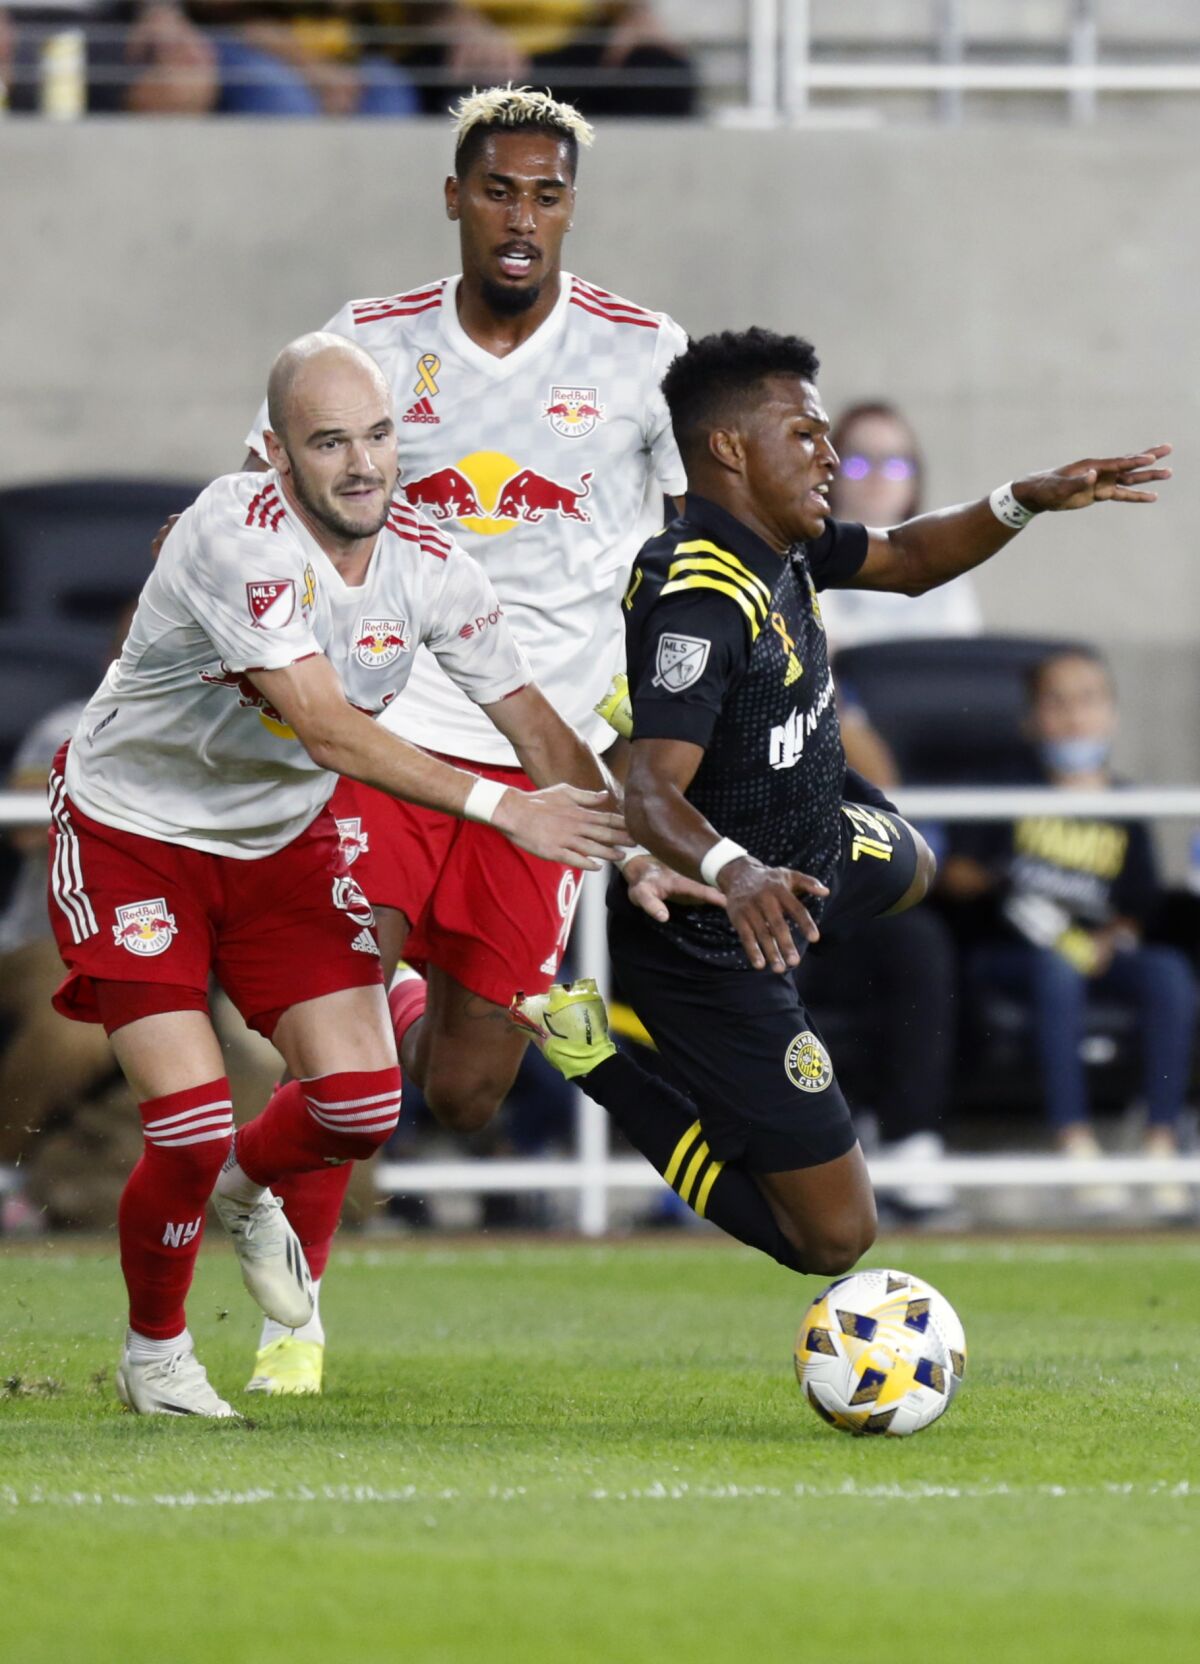 New York Red Bulls defender Andrew Gutman left, and forward Fabio work for the ball behind Columbus Crew midfielder Luis Diaz during the second half of an MLS soccer match in Columbus, Ohio, Tuesday, Sept. 14, 2021. The Crew won 2-1. (AP Photo/Paul Vernon)